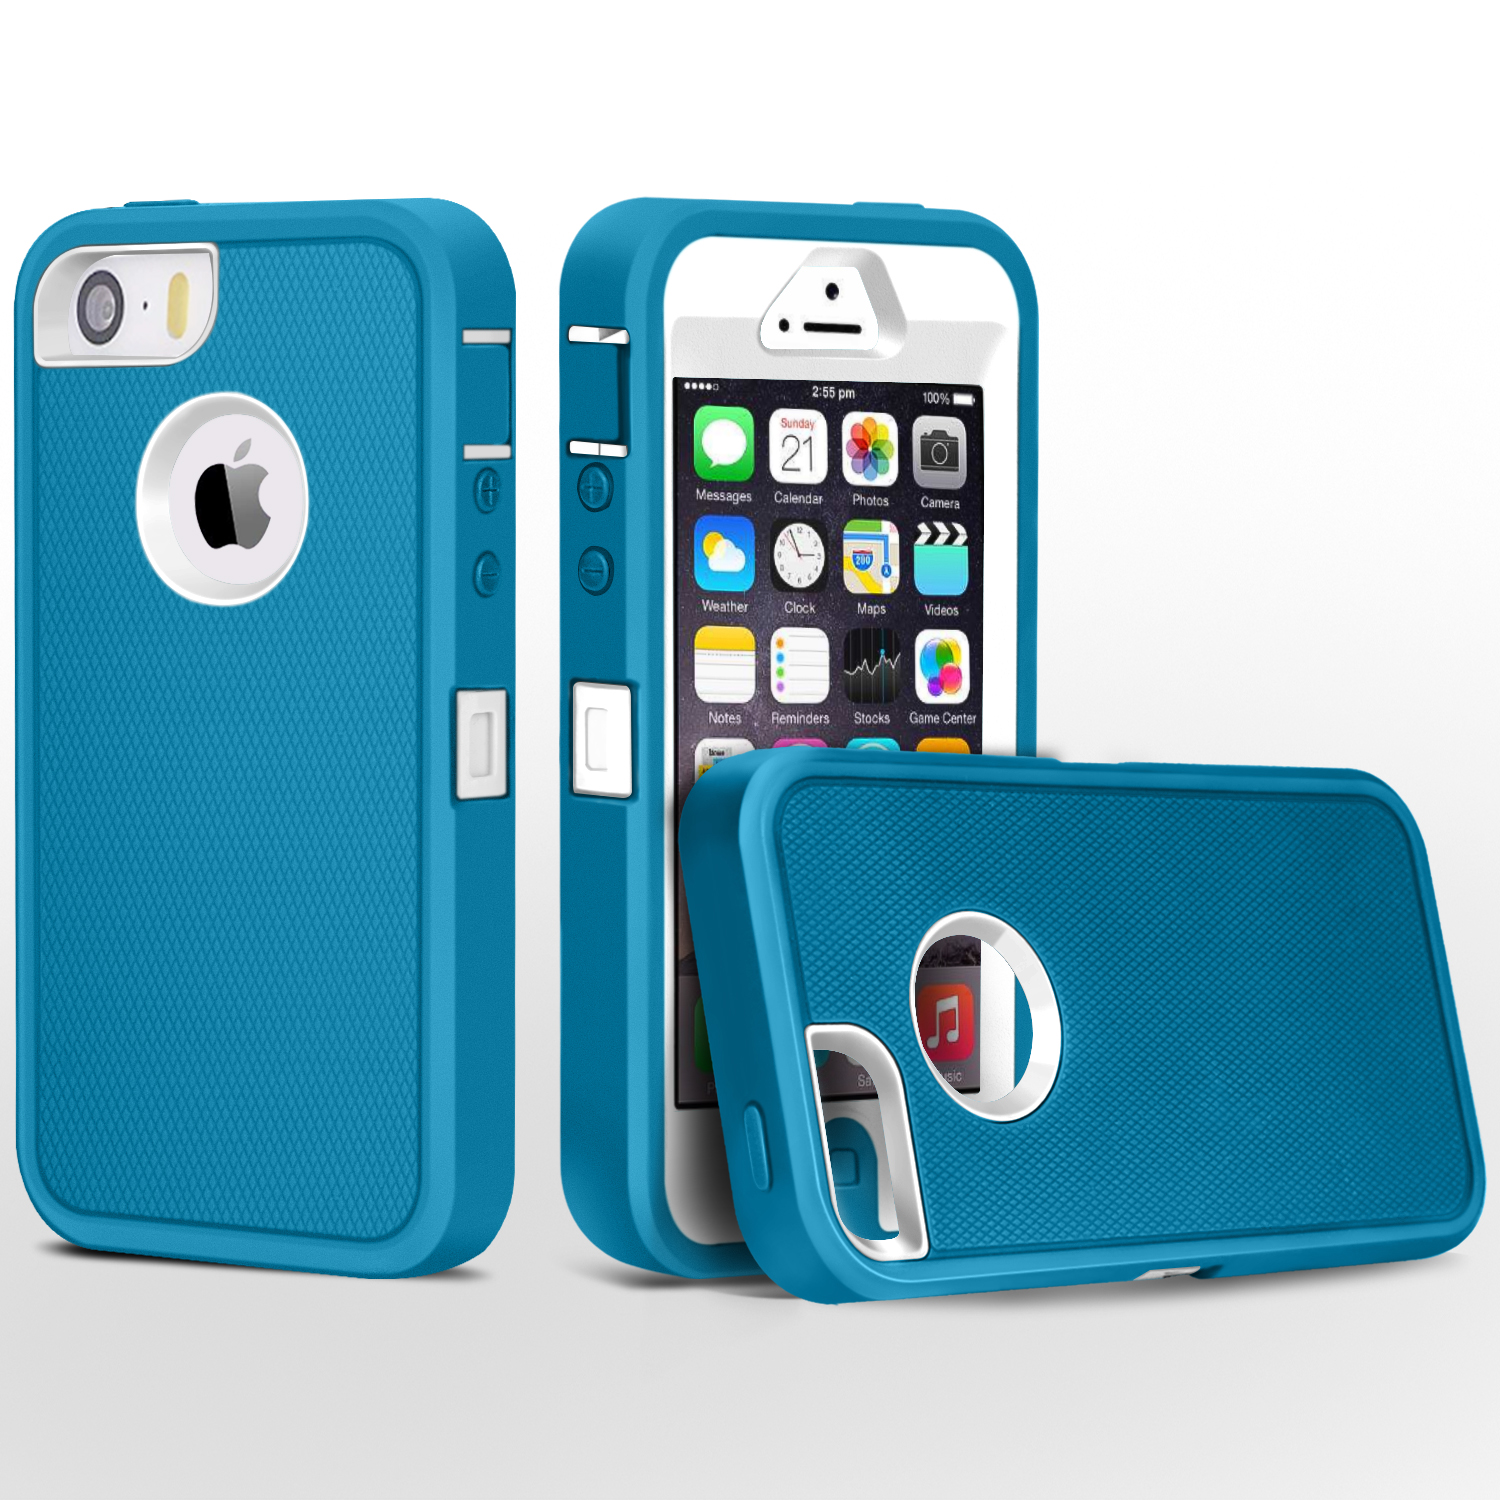 iPhone 5 Case, FogeekHeavy Duty PC + TPU Combo Protective Defender Body Armor Case for iPhone 5 & iPhone 5S(Light Blue/White) …